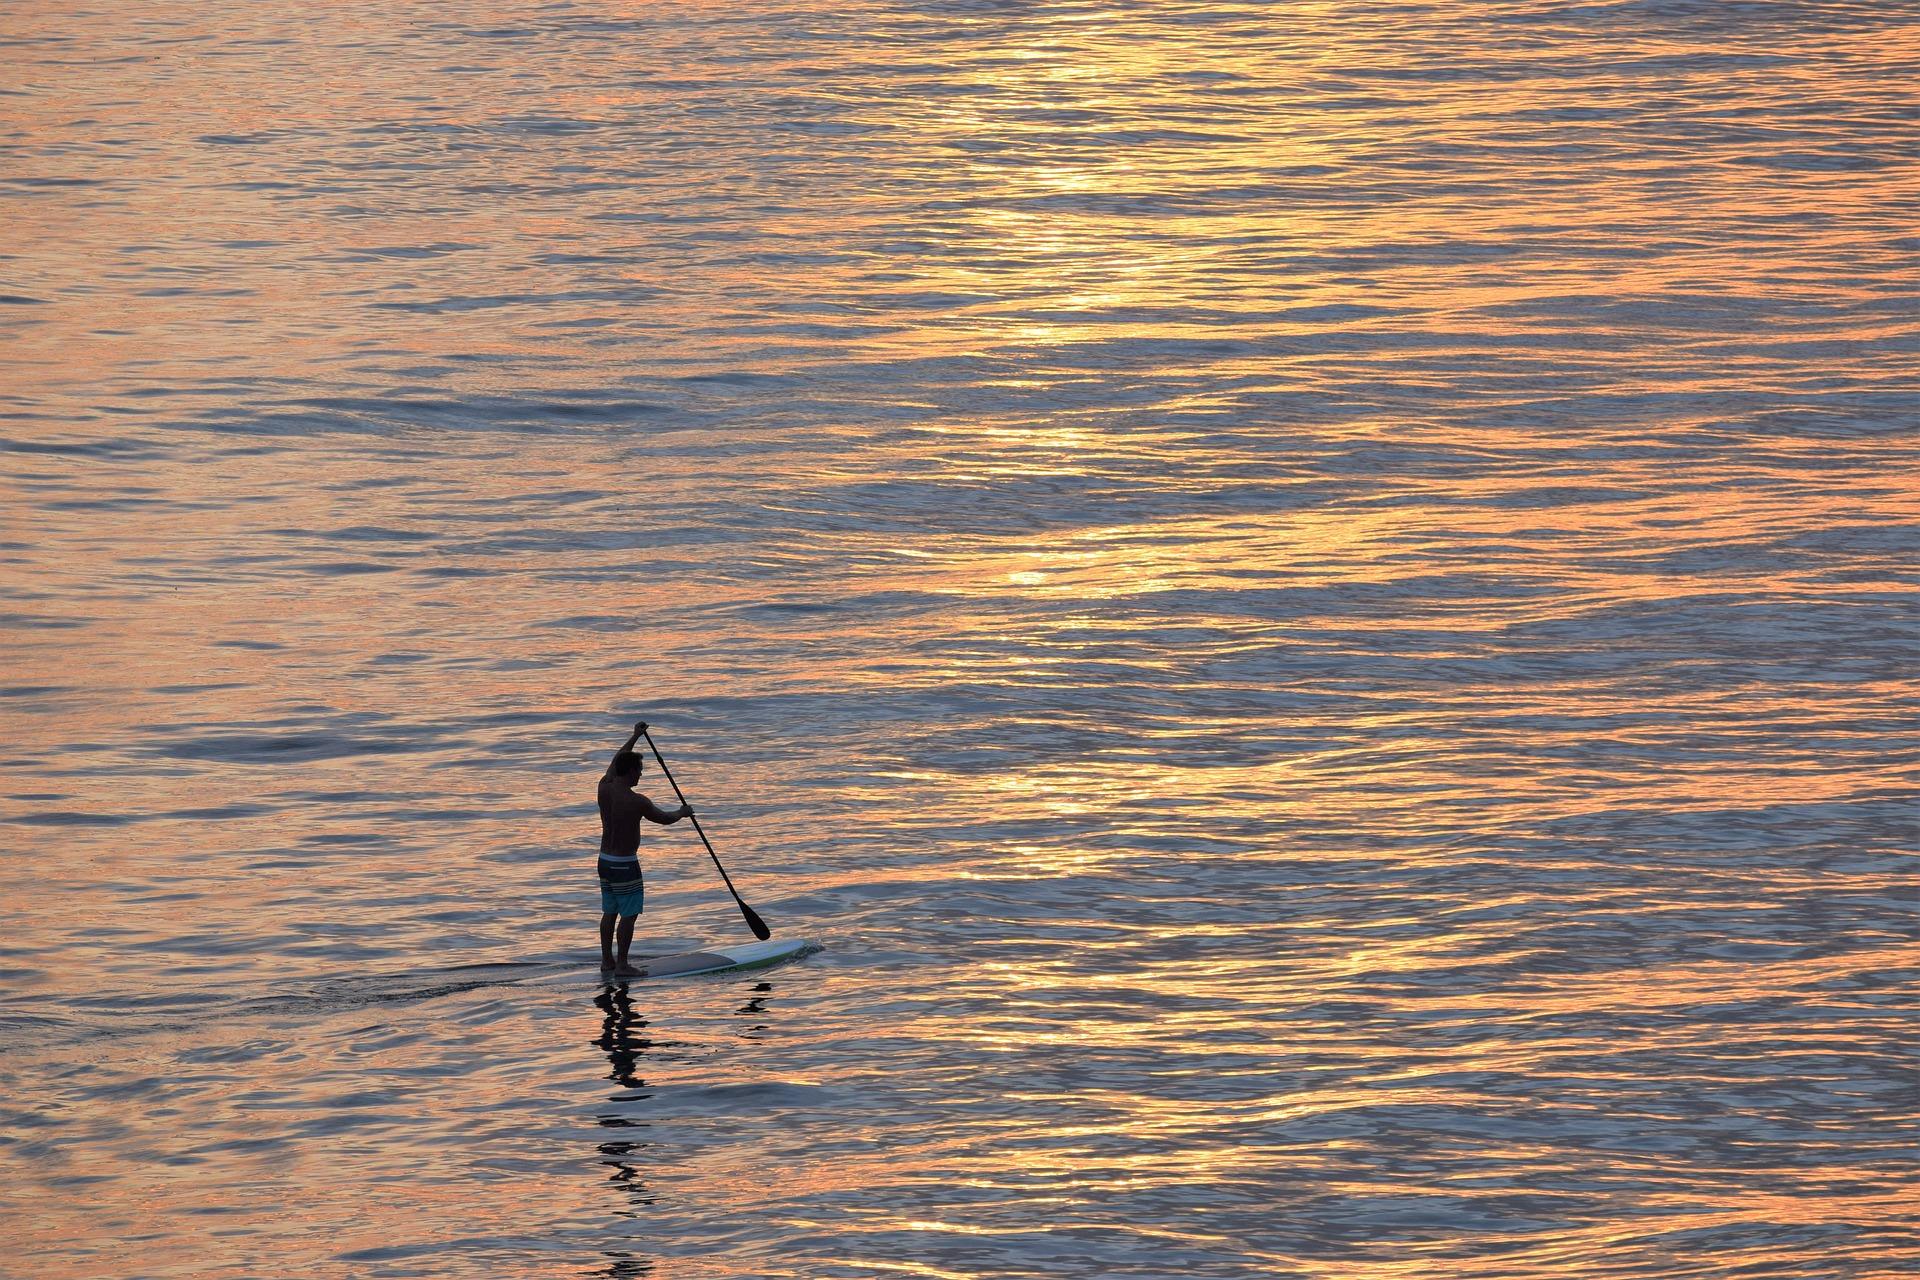 A picture of a person Paddleboarding